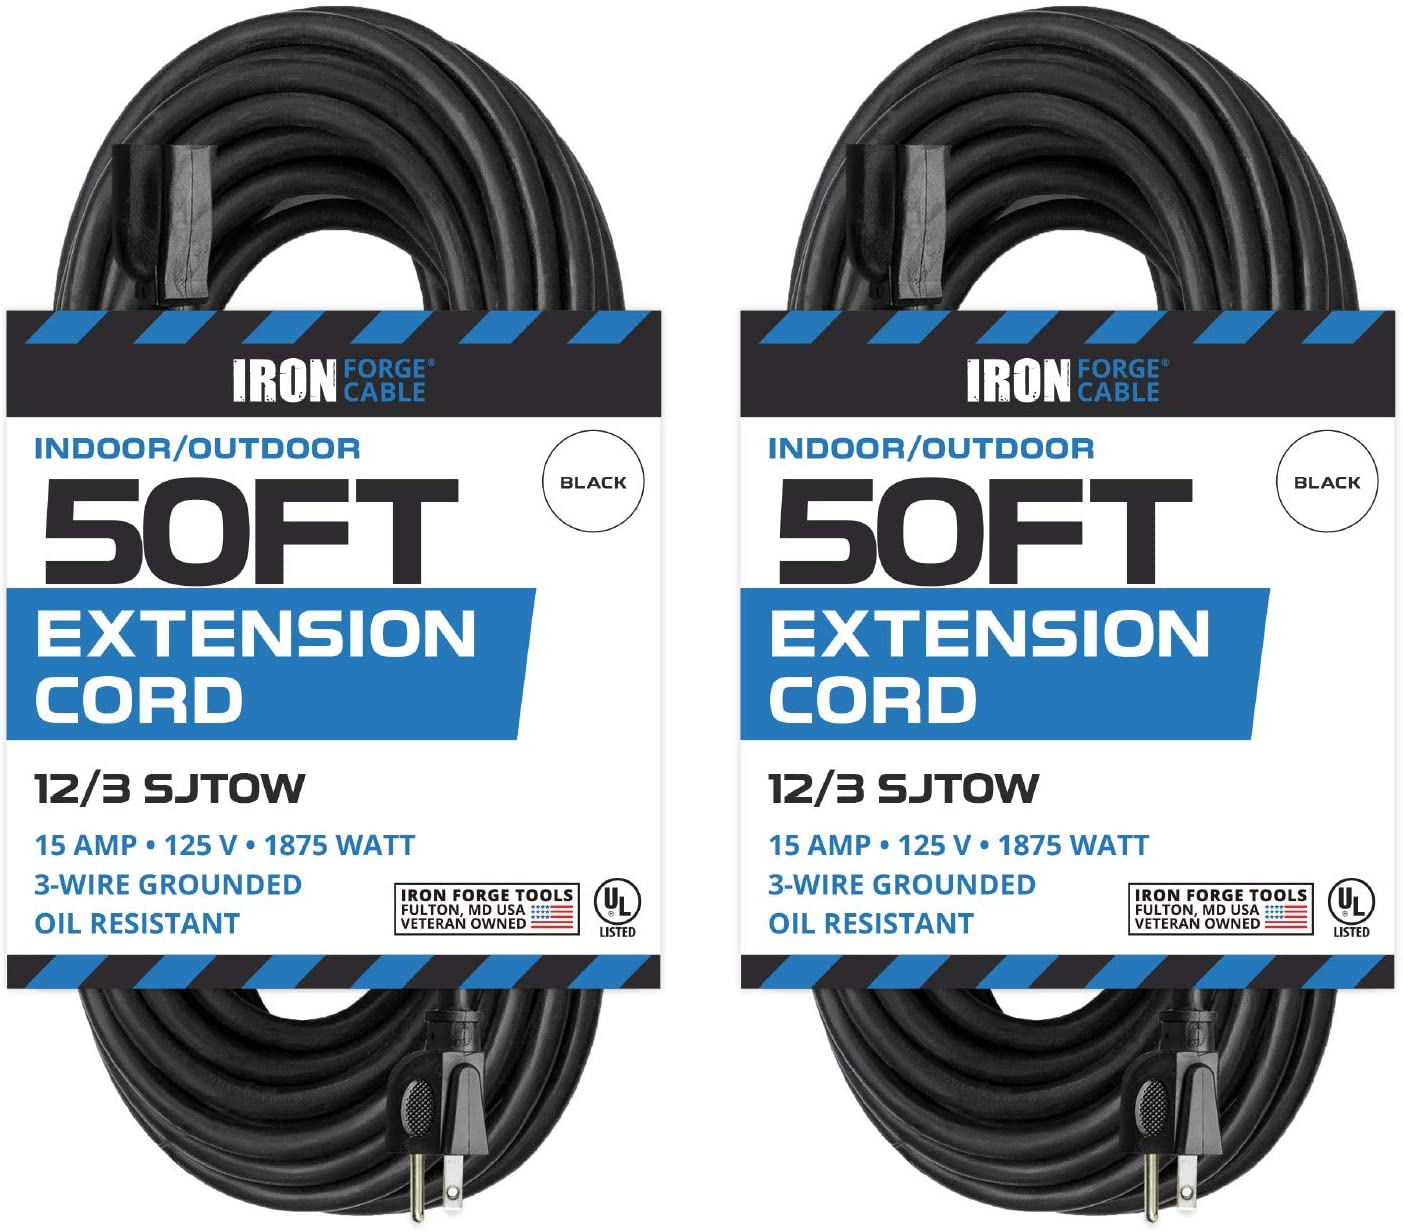 2 Pack of 50 Ft Oil Resistant Extension Cords for Farms and Ranches - 12/3 SJTOW Heavy Duty Black Outdoor Cable with 3 Prong Grounded Plug for Safety